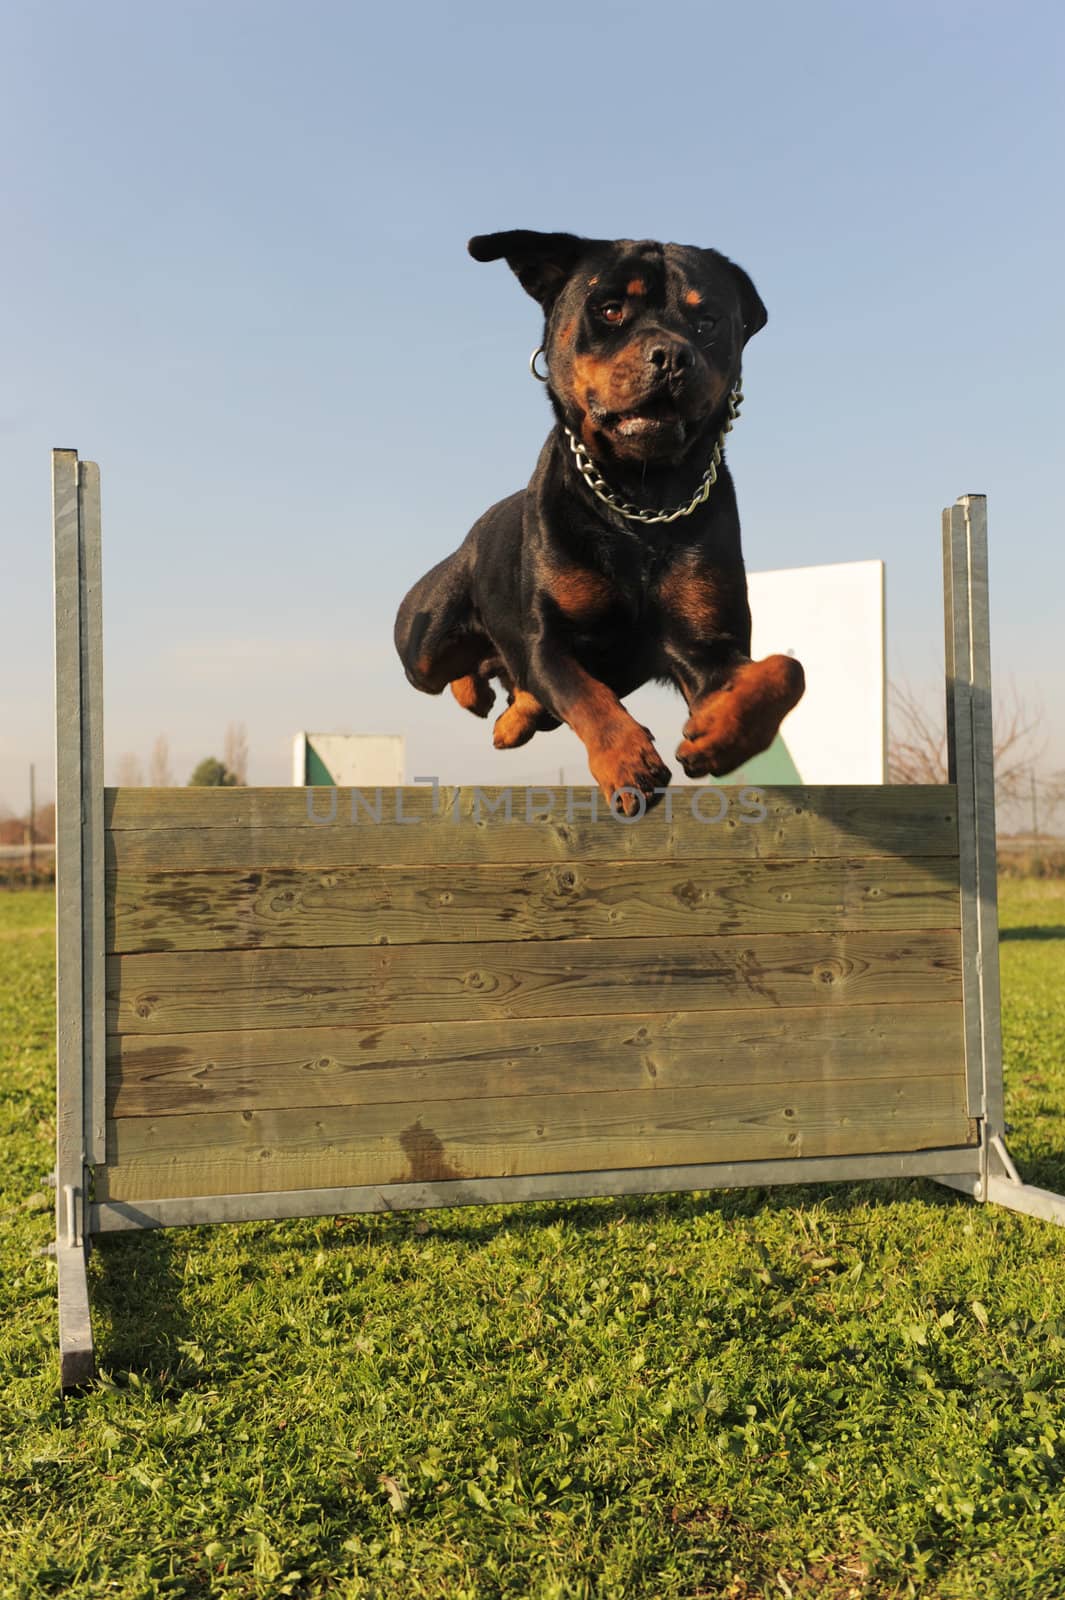 purebred rottweiler jumping in a training of obedience